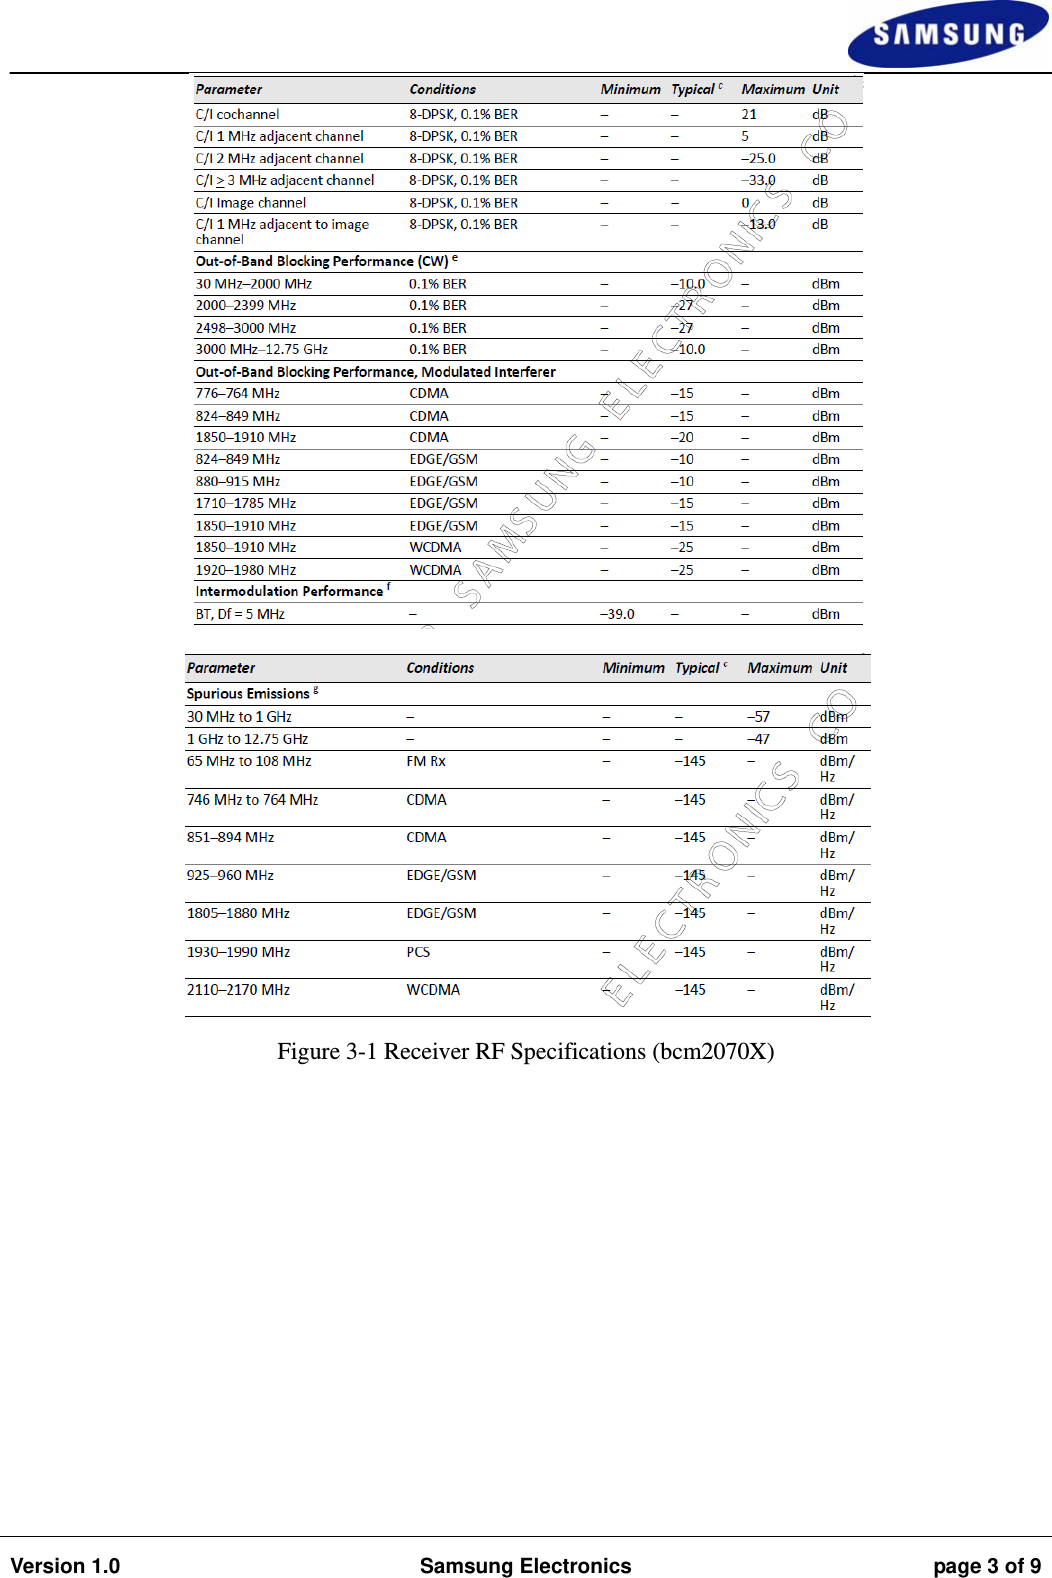                                                                                                                                                                    Version 1.0  Samsung Electronics  page 3 of 9    Figure 3-1 Receiver RF Specifications (bcm2070X)   